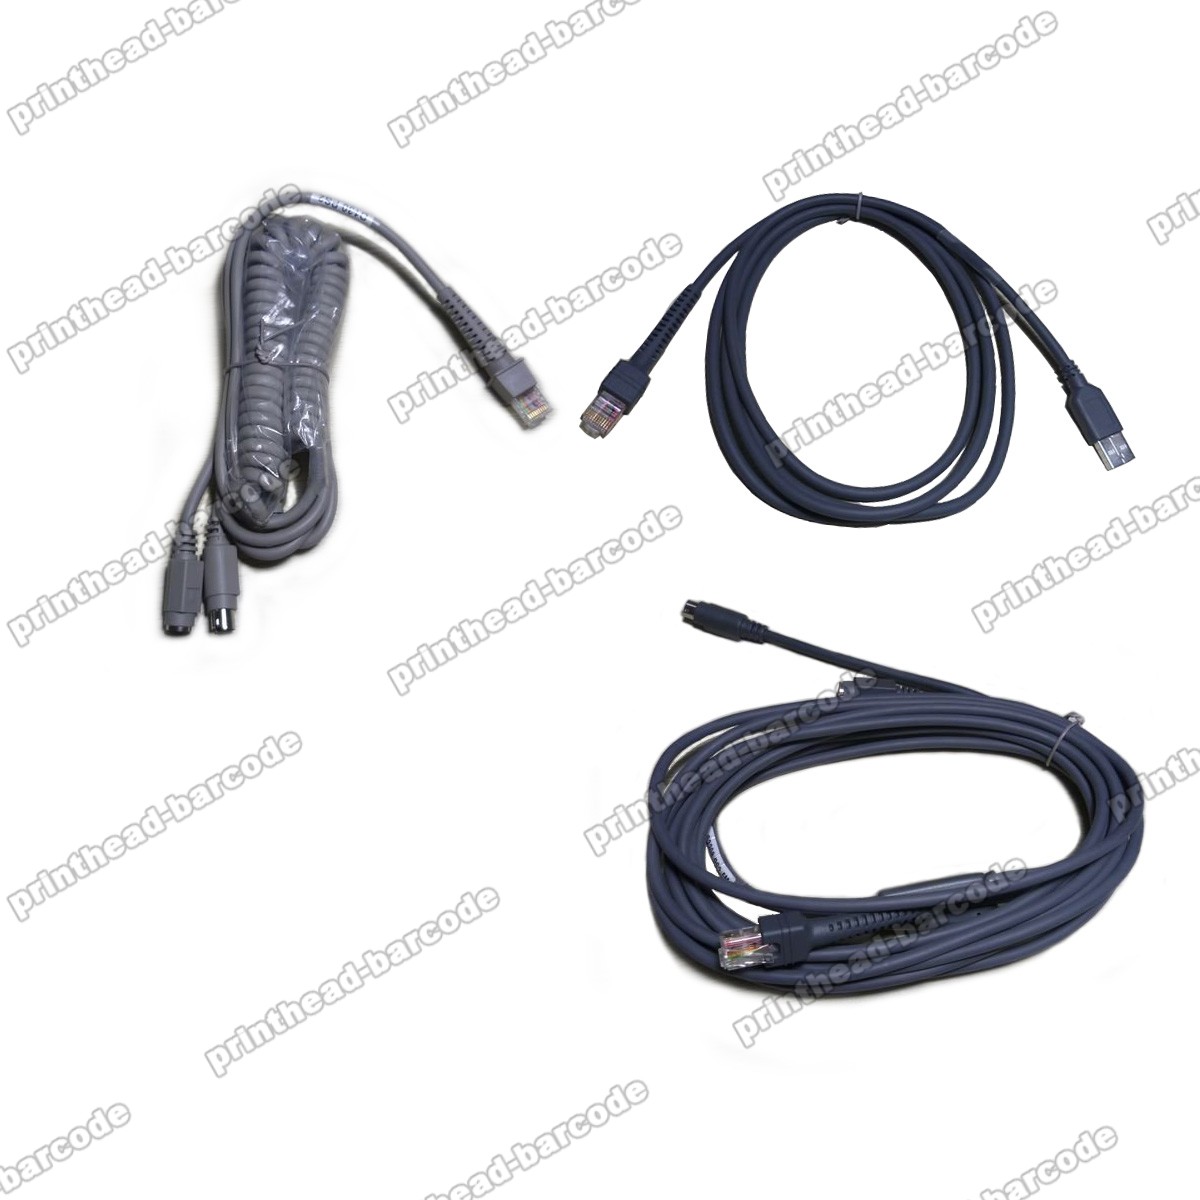 PS2 Keyboard Wedge Cable for Honeywell HHP 3800G 2M Compatible - Click Image to Close